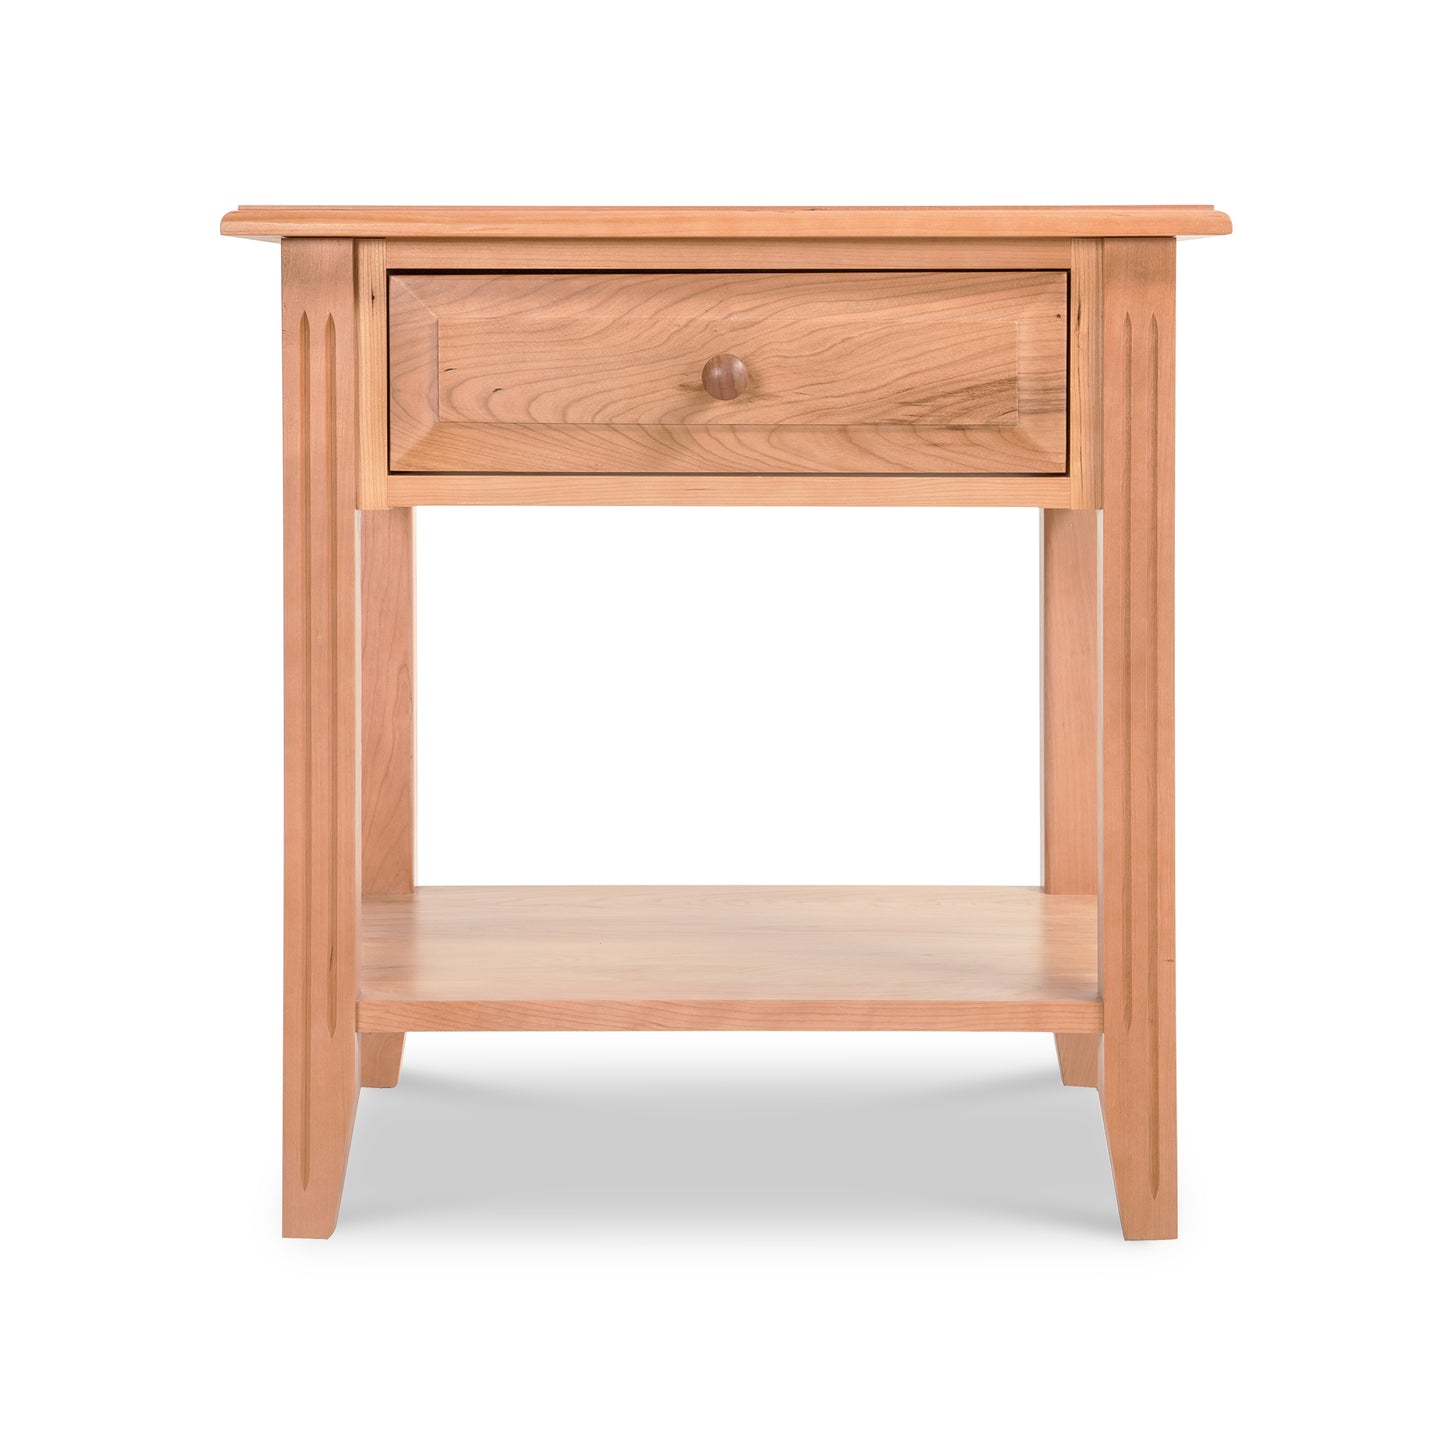 A Renfrew Shaker 1-Drawer Open Shelf Nightstand crafted from solid hardwoods, featuring a single drawer on top, made by Lyndon Furniture.